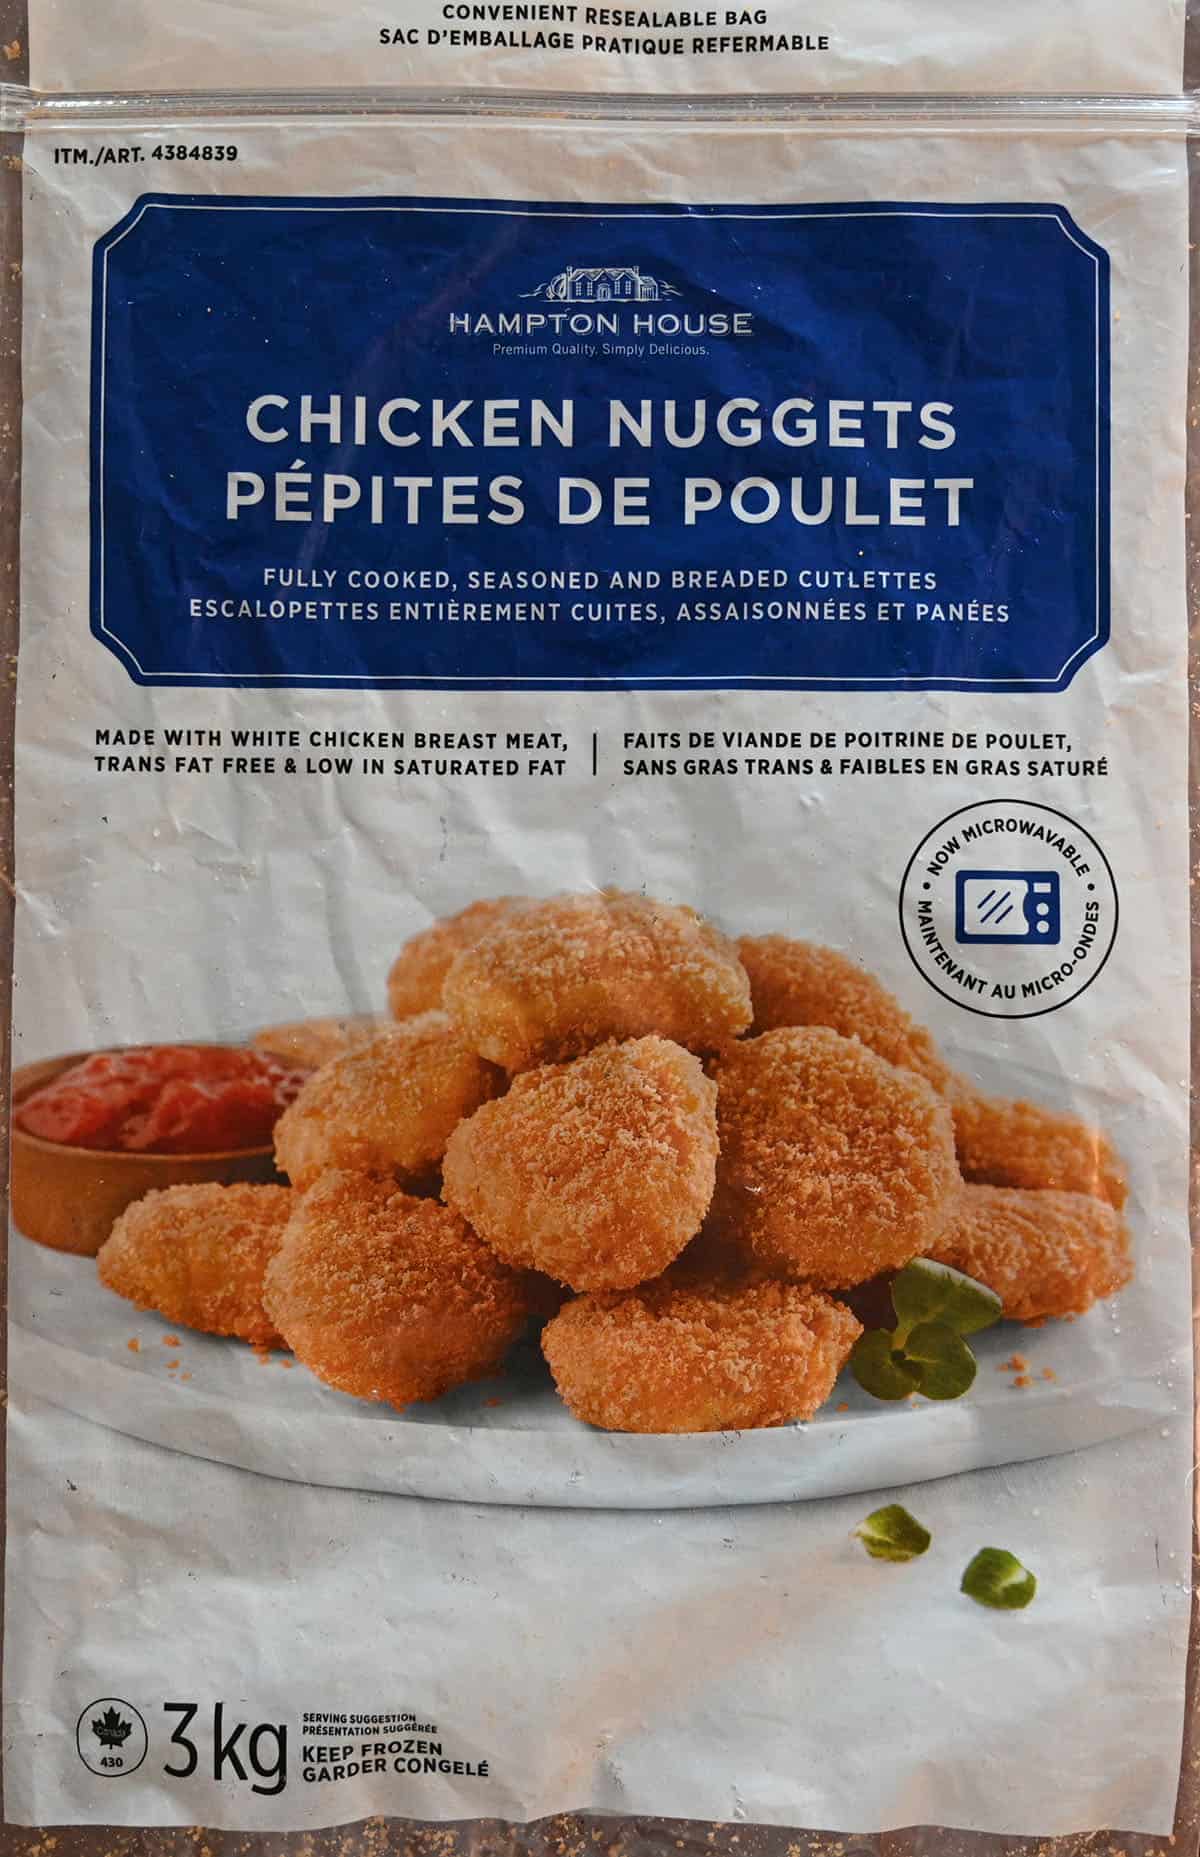 Close up image of the Costco Hampton House Chicken Nuggets bag. 